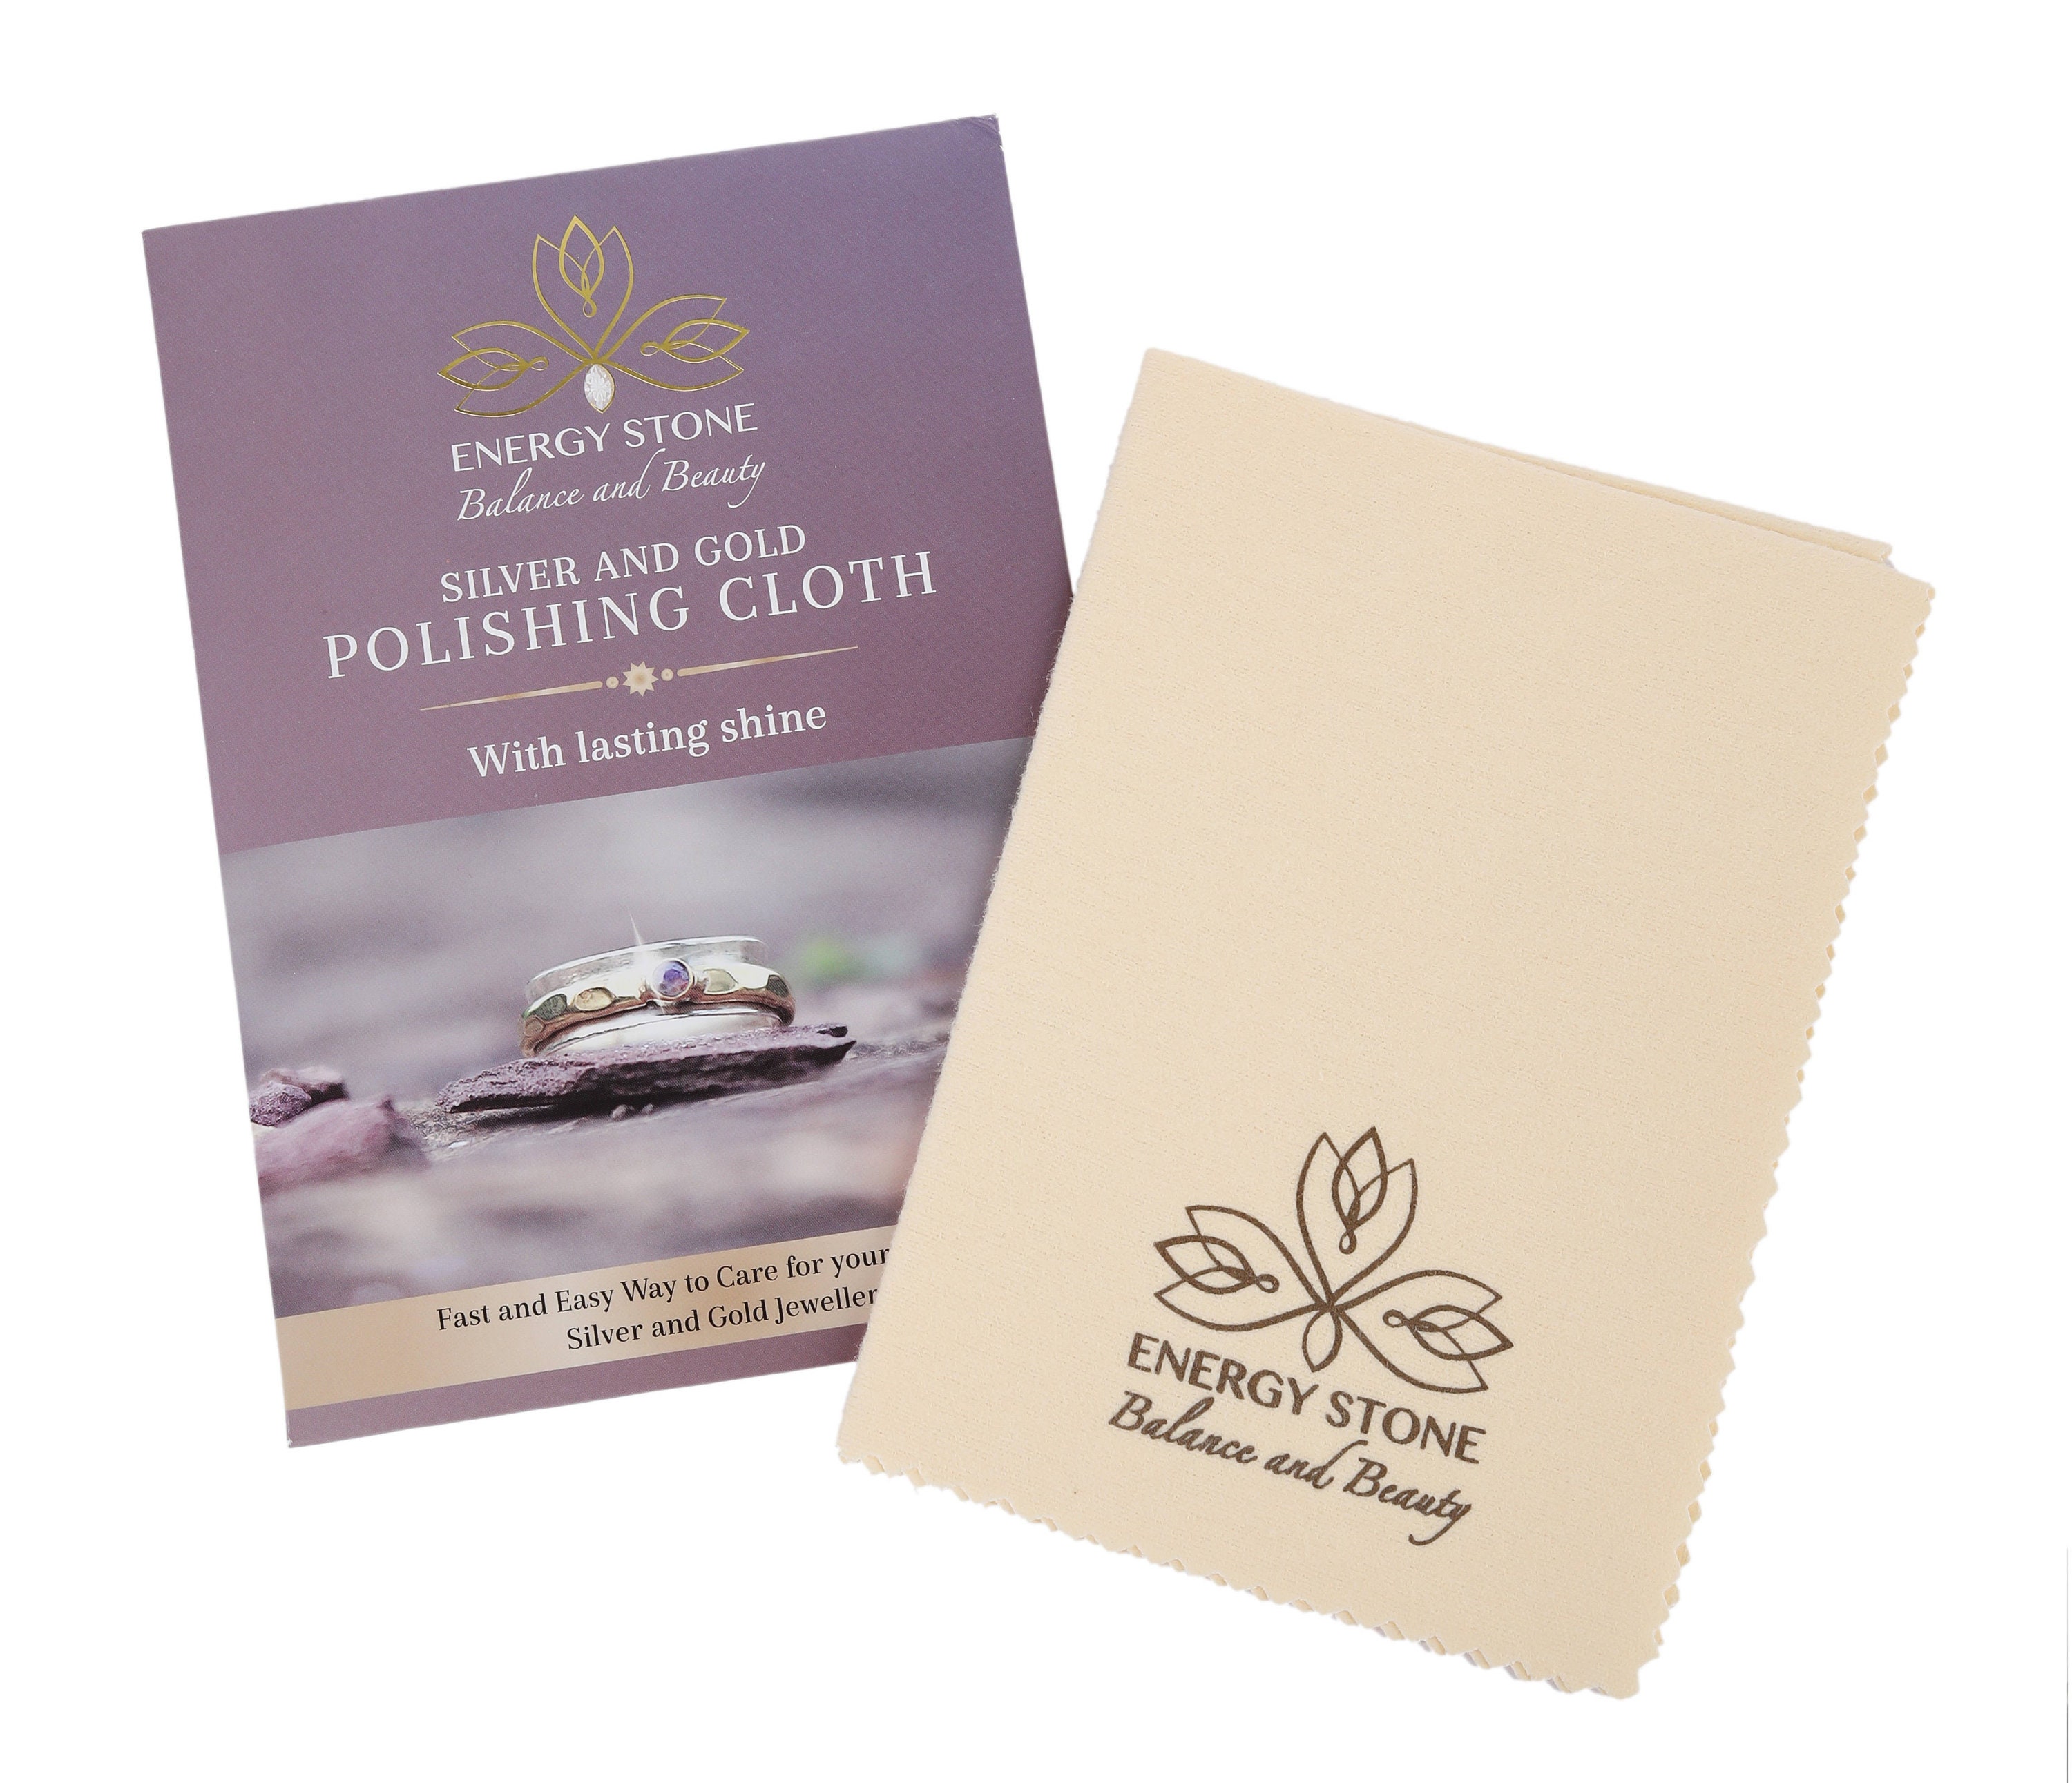 Best Silver Cleaning Cloth Town Talk Anti-tarnish Sterling Silver Polishing  Cloth Clean Jewelry 5x7 Inches Cleaner for Sterling Silver 